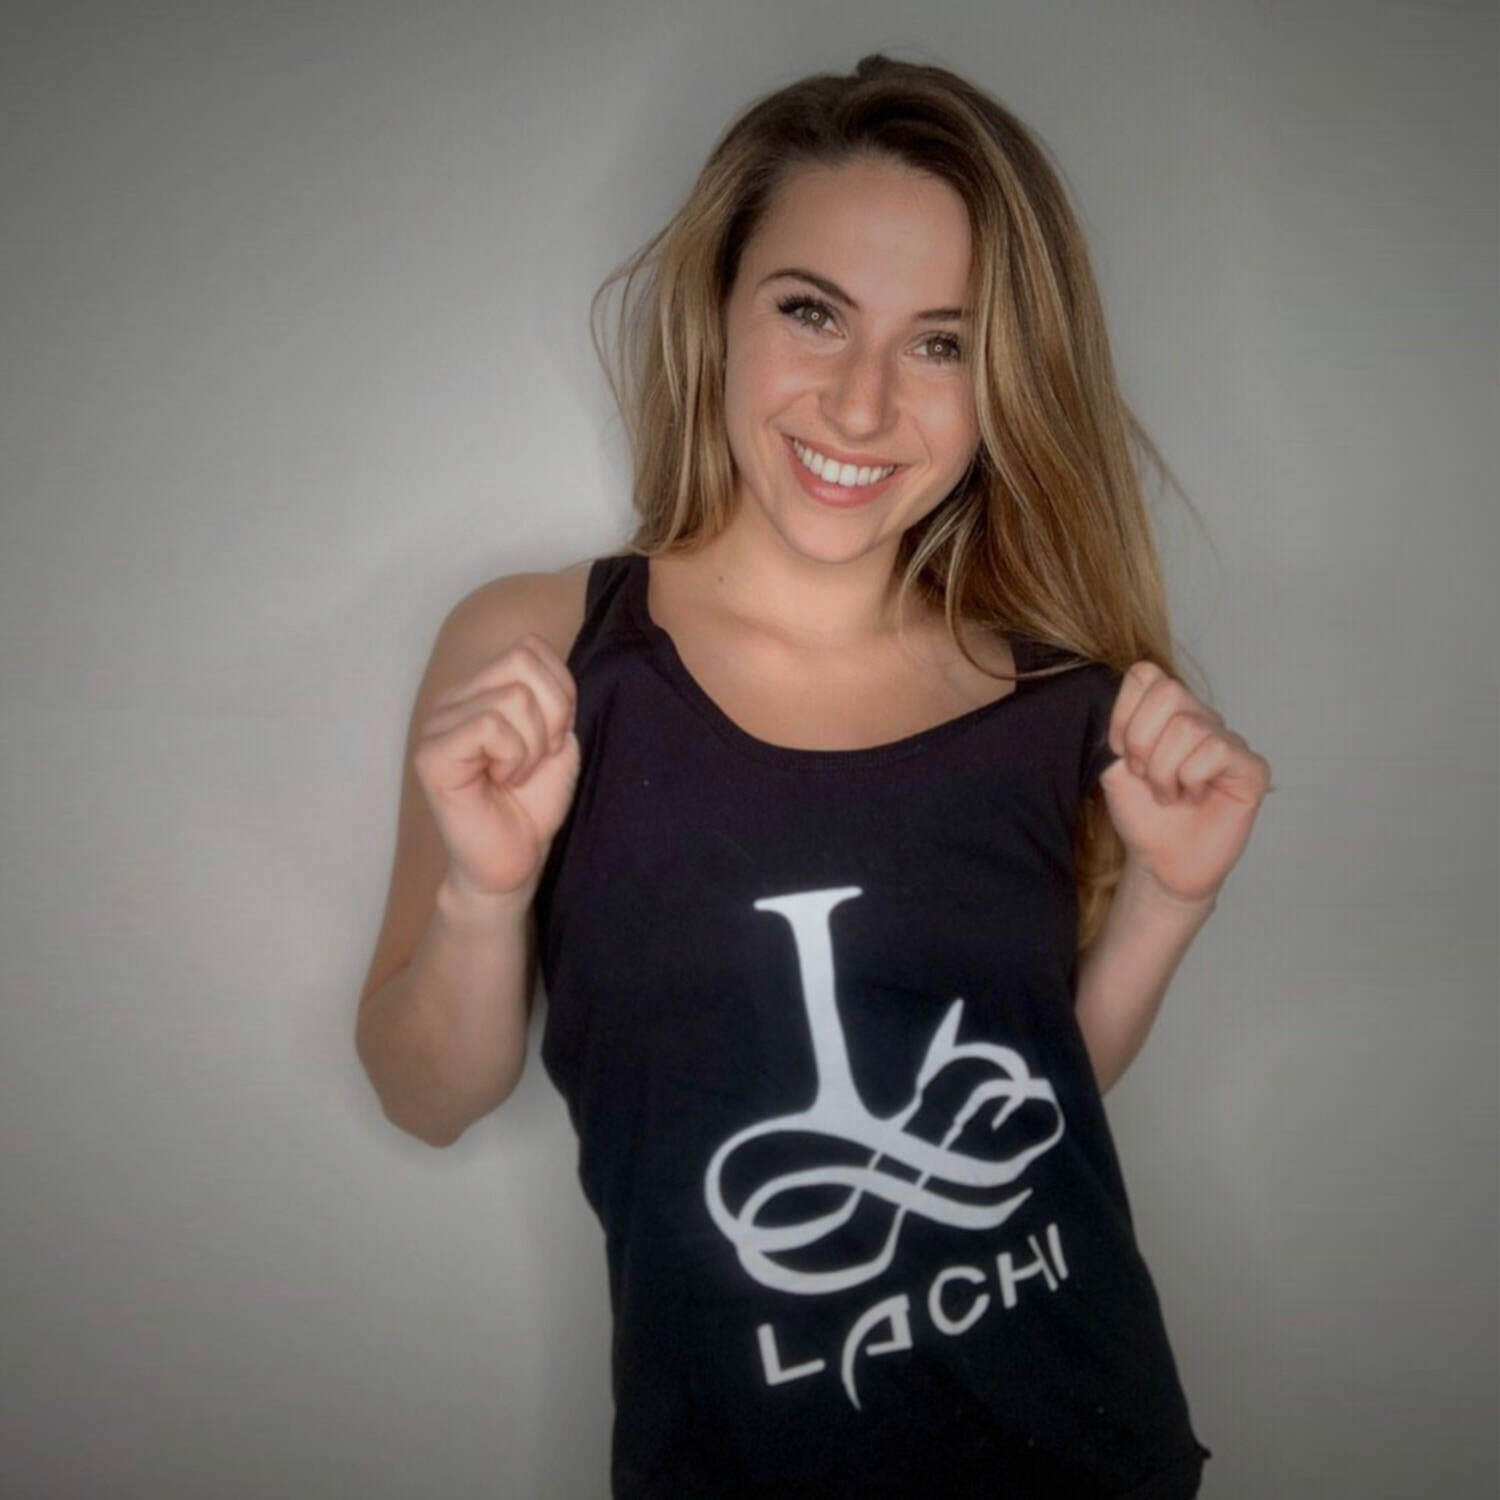 A white woman shows off her black shirt with the word "Lachi" and a stylized letter L emblazoned on the front